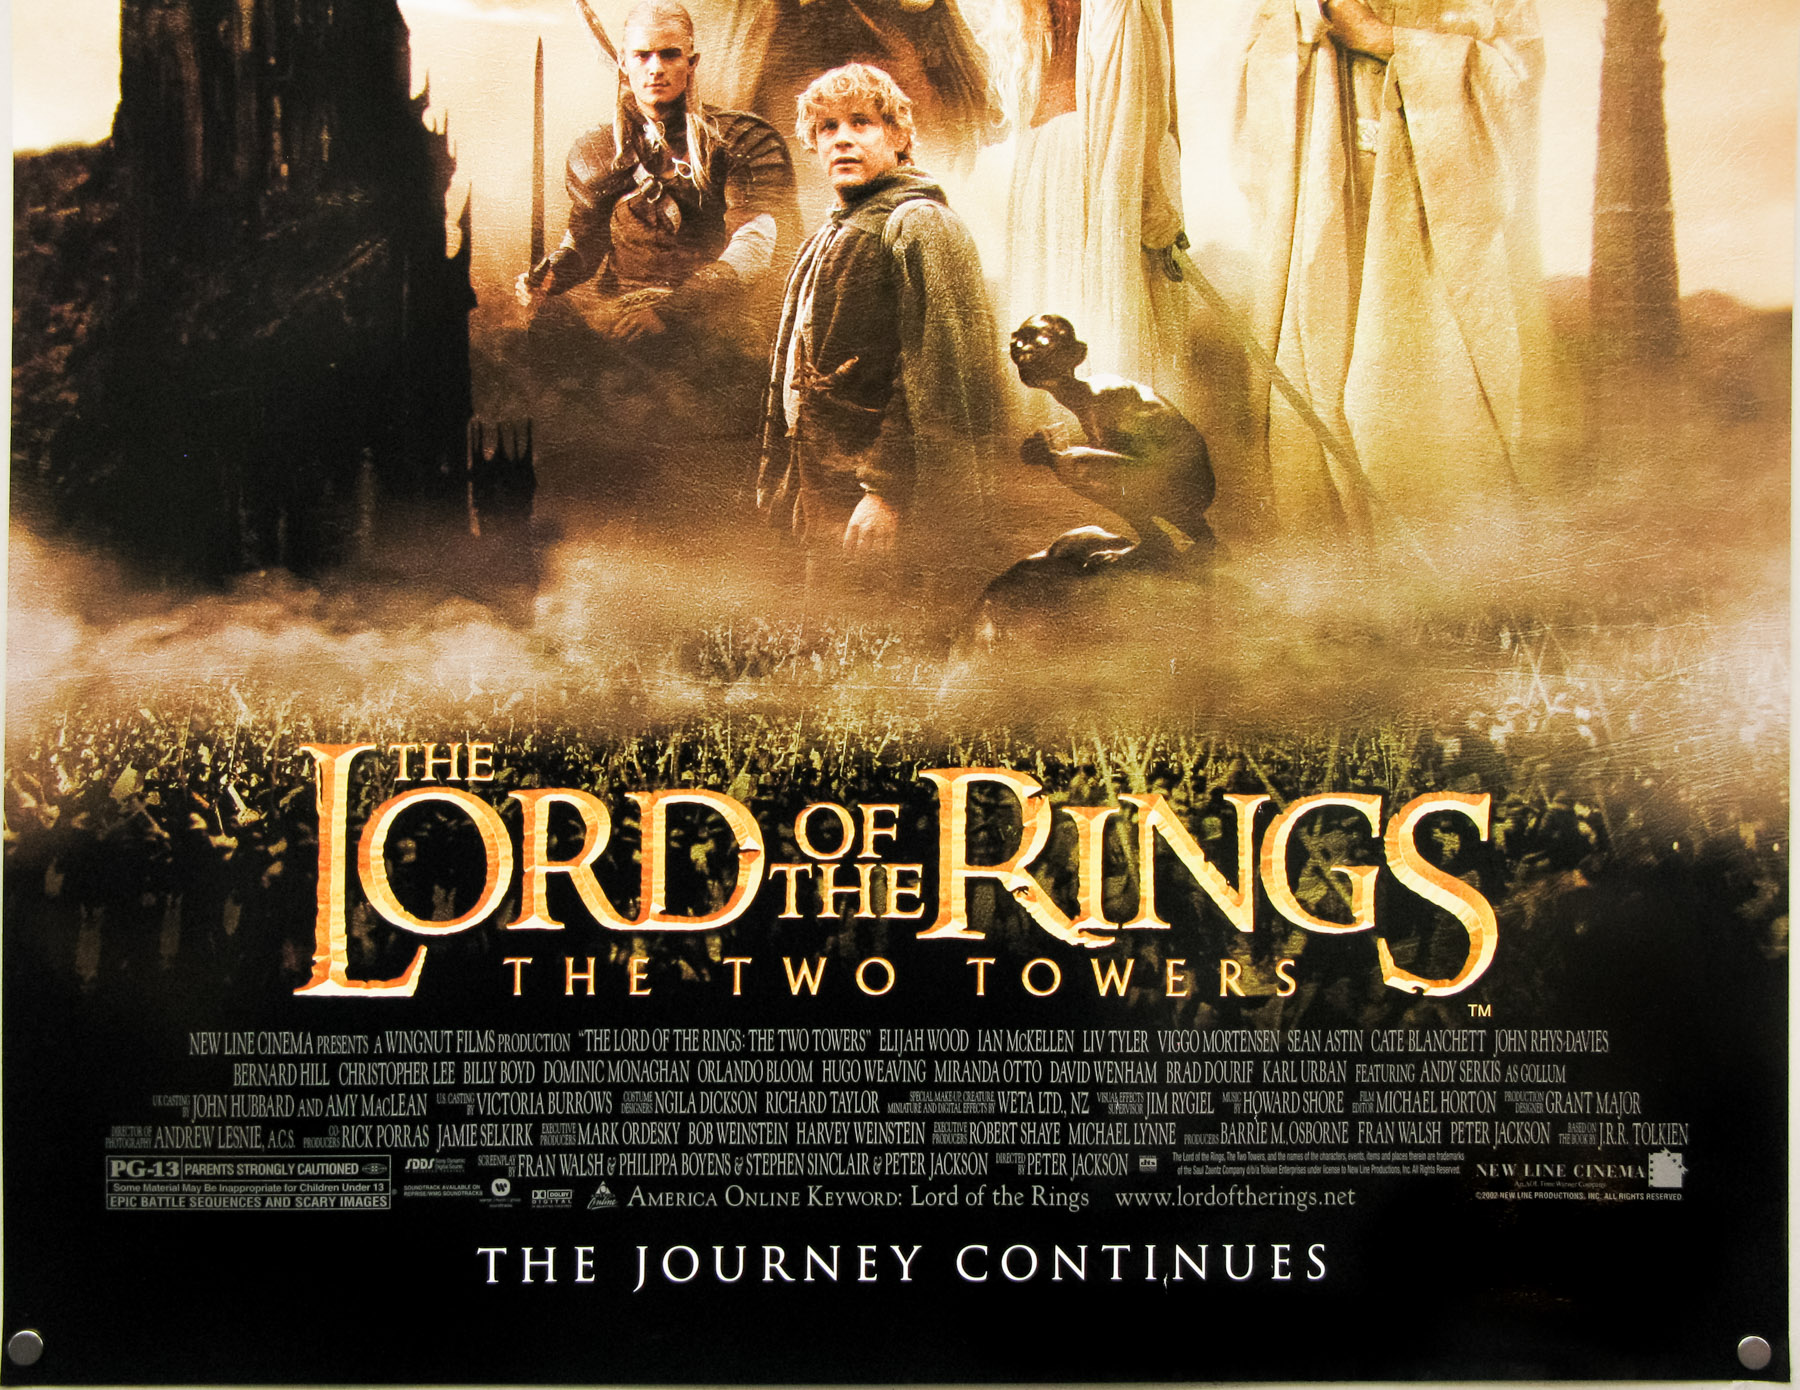 LORD OF THE RINGS The Two Towers MOVIE POSTER Original DS 27x40 Tower...